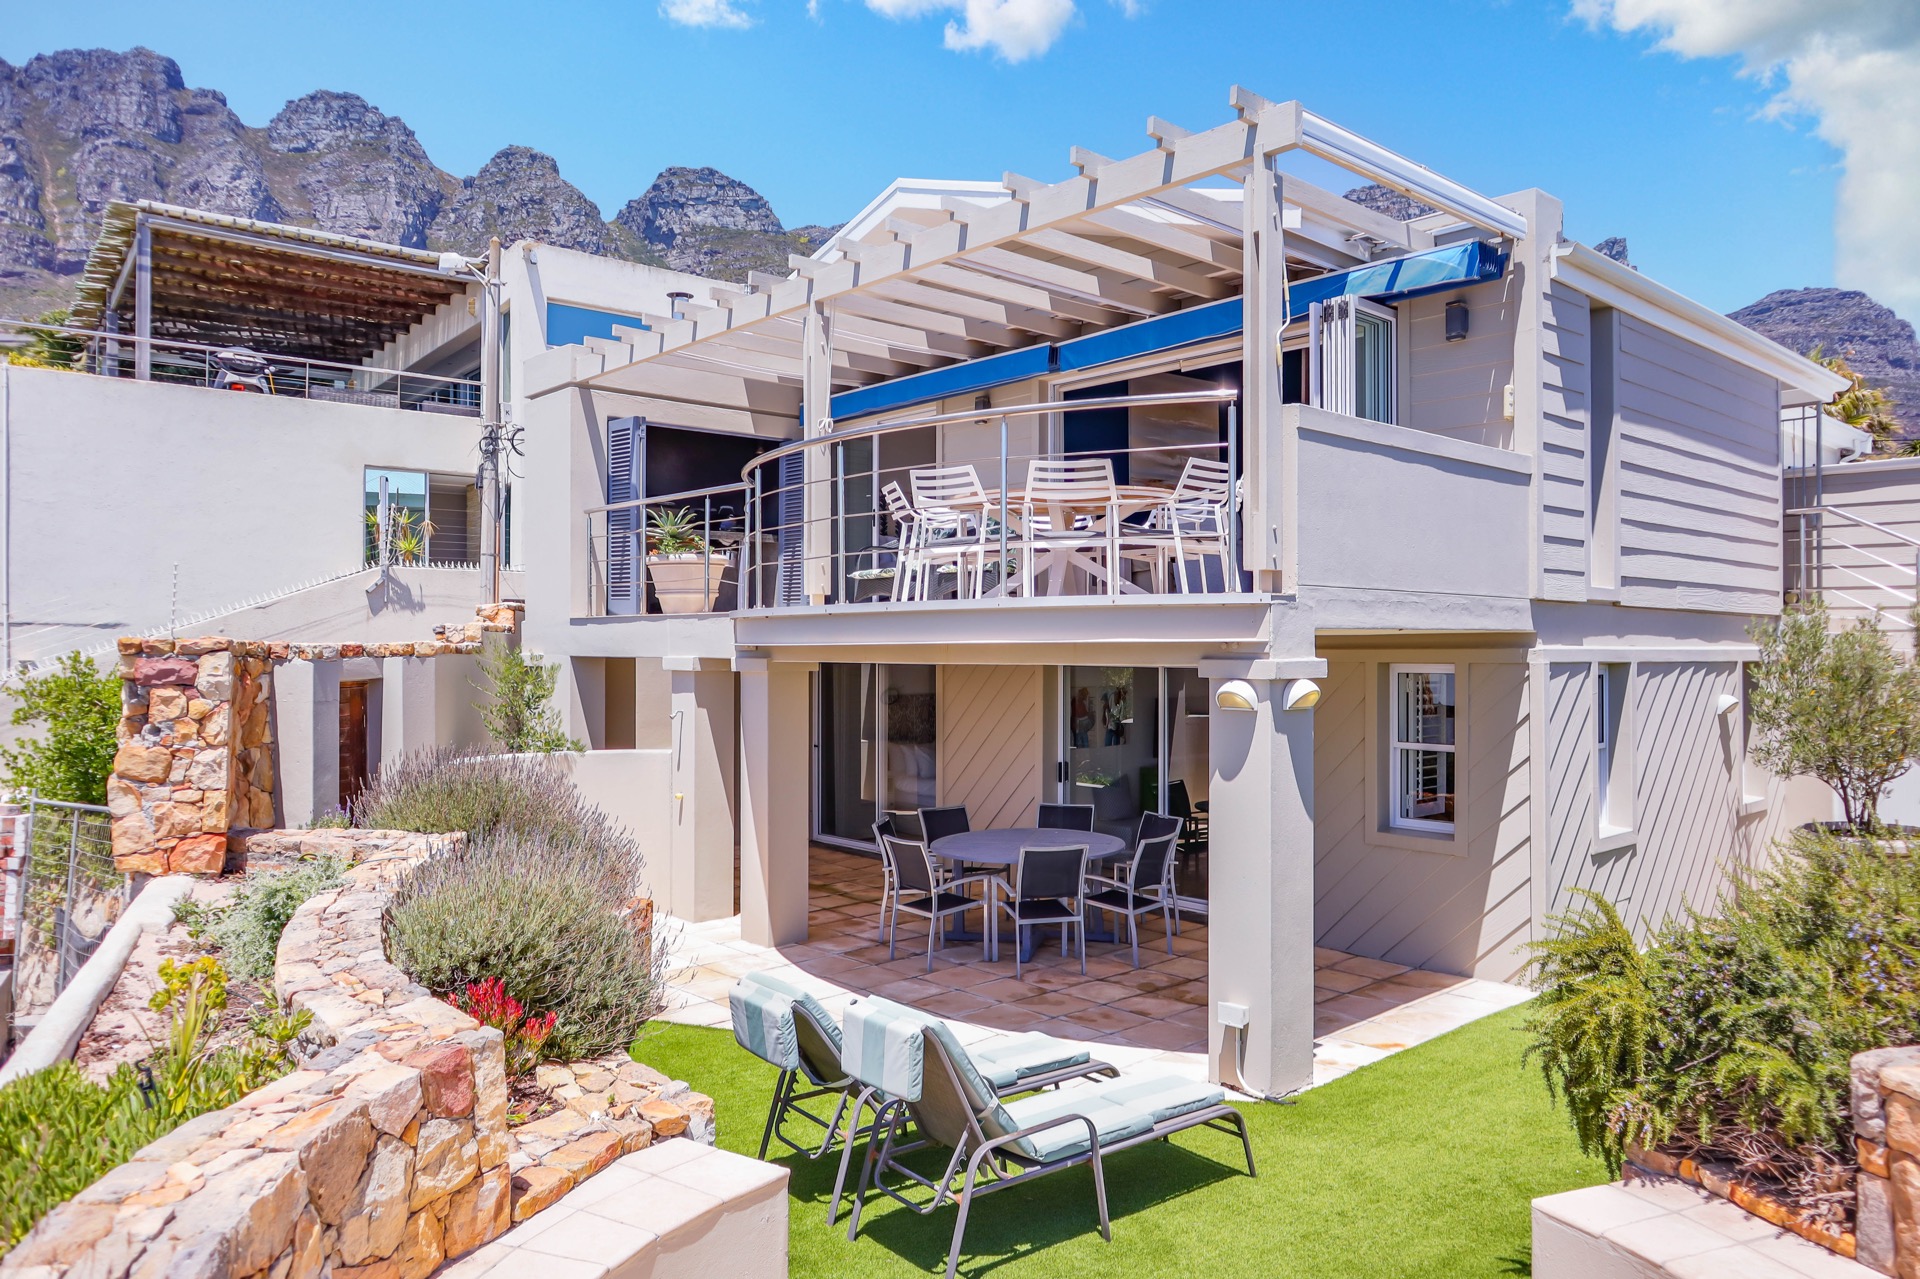 Newly Remodeled 4 Bedroom House For Sale in Camps Bay, Cape Town